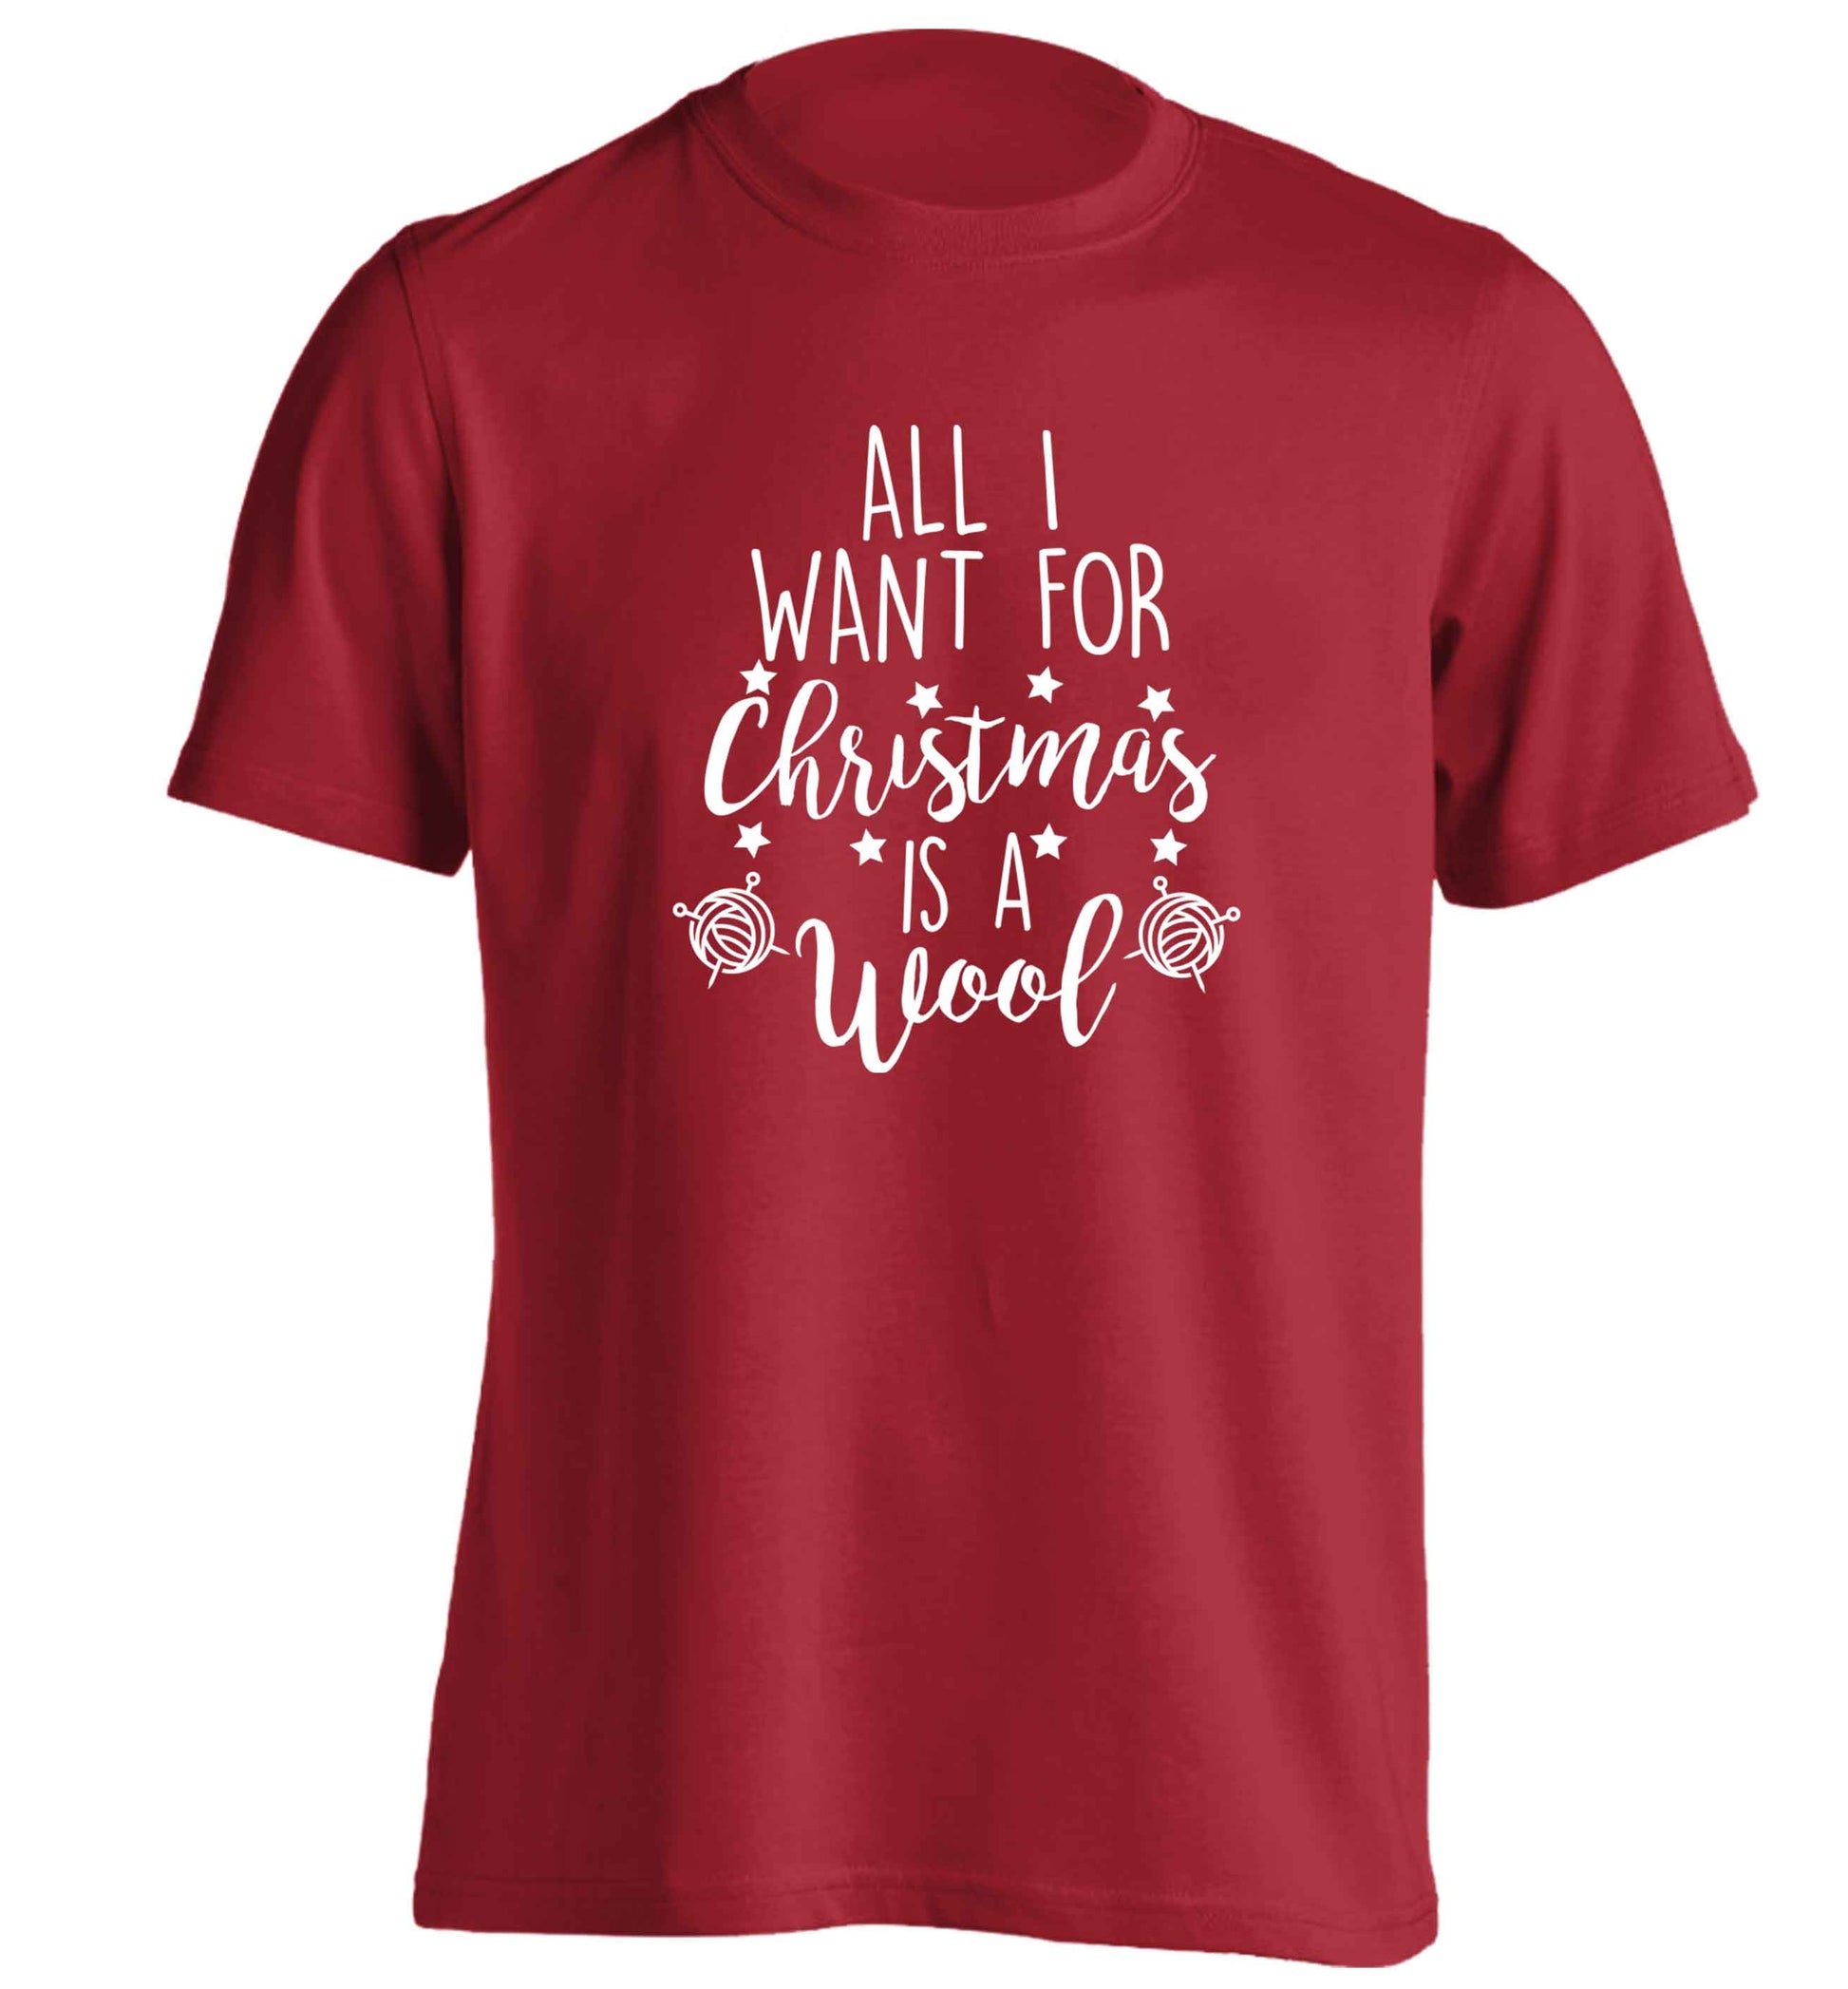 All I want for Christmas is wool! adults unisex red Tshirt 2XL